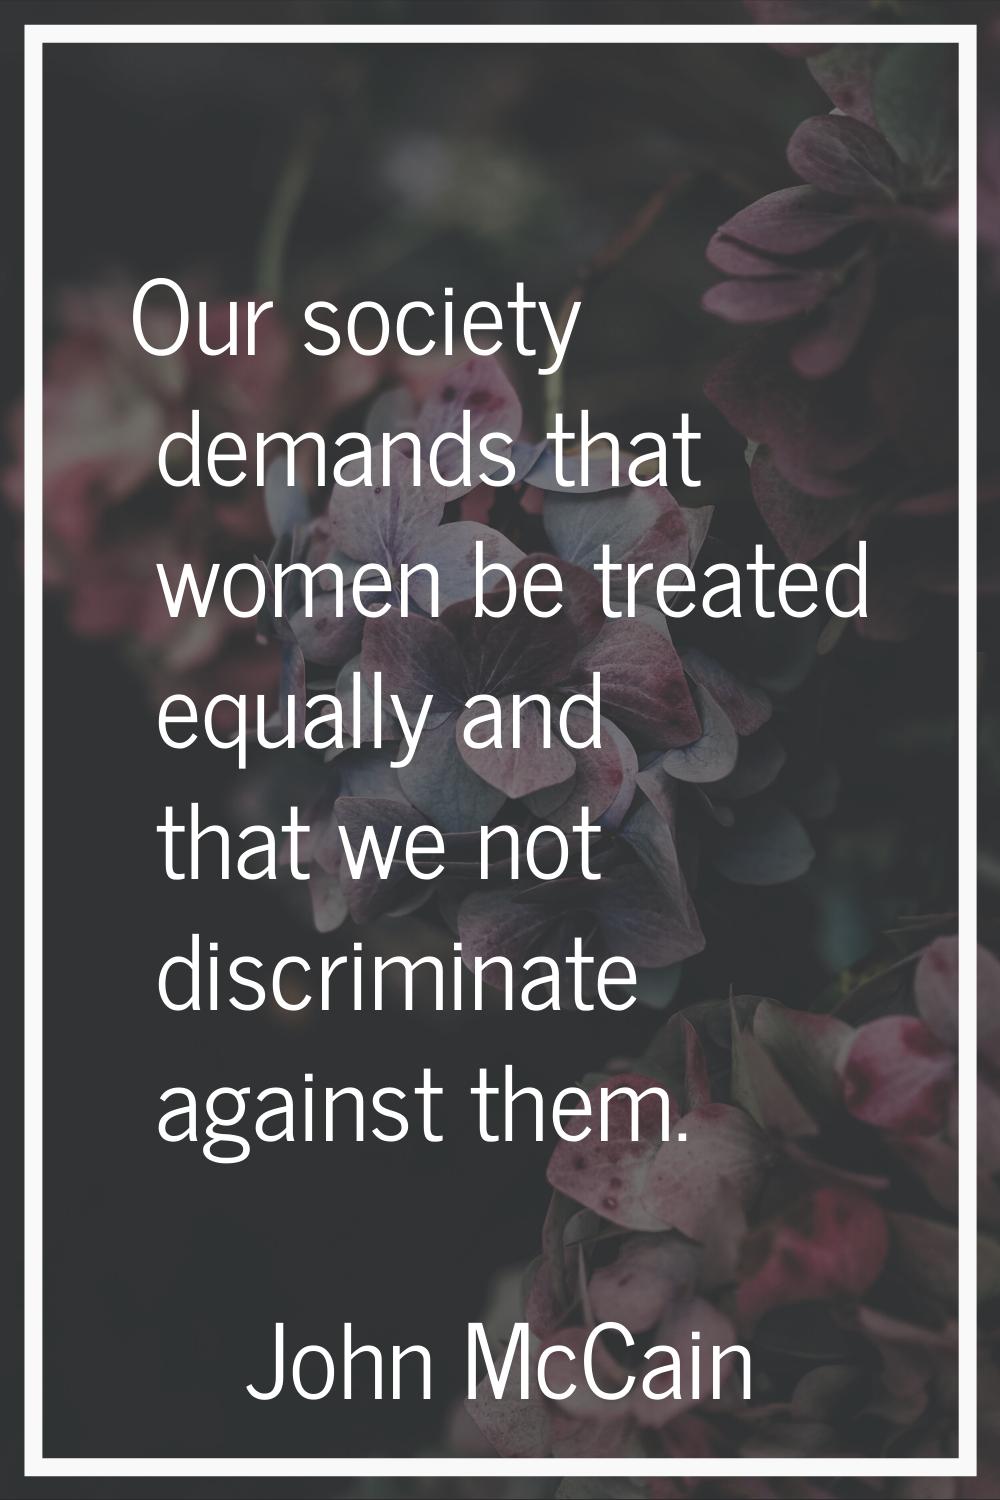 Our society demands that women be treated equally and that we not discriminate against them.